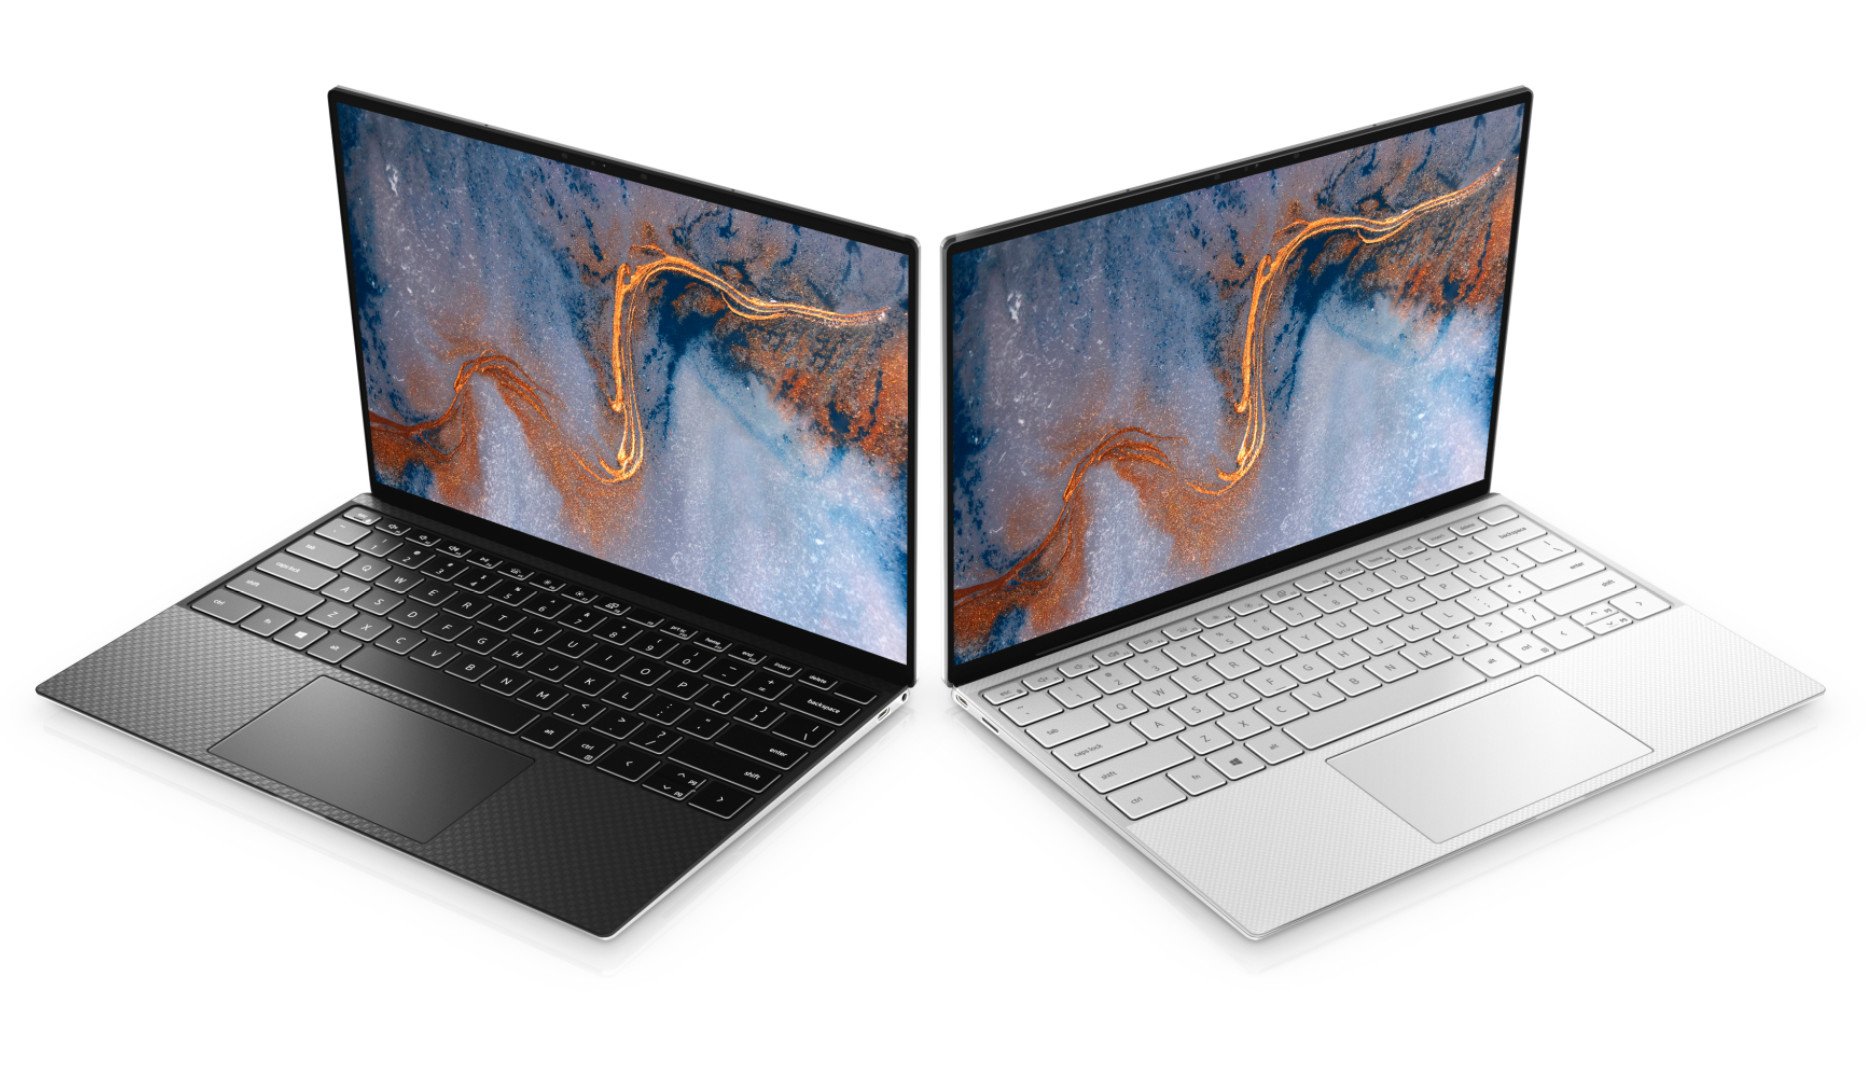 Dell XPS 13 black and white